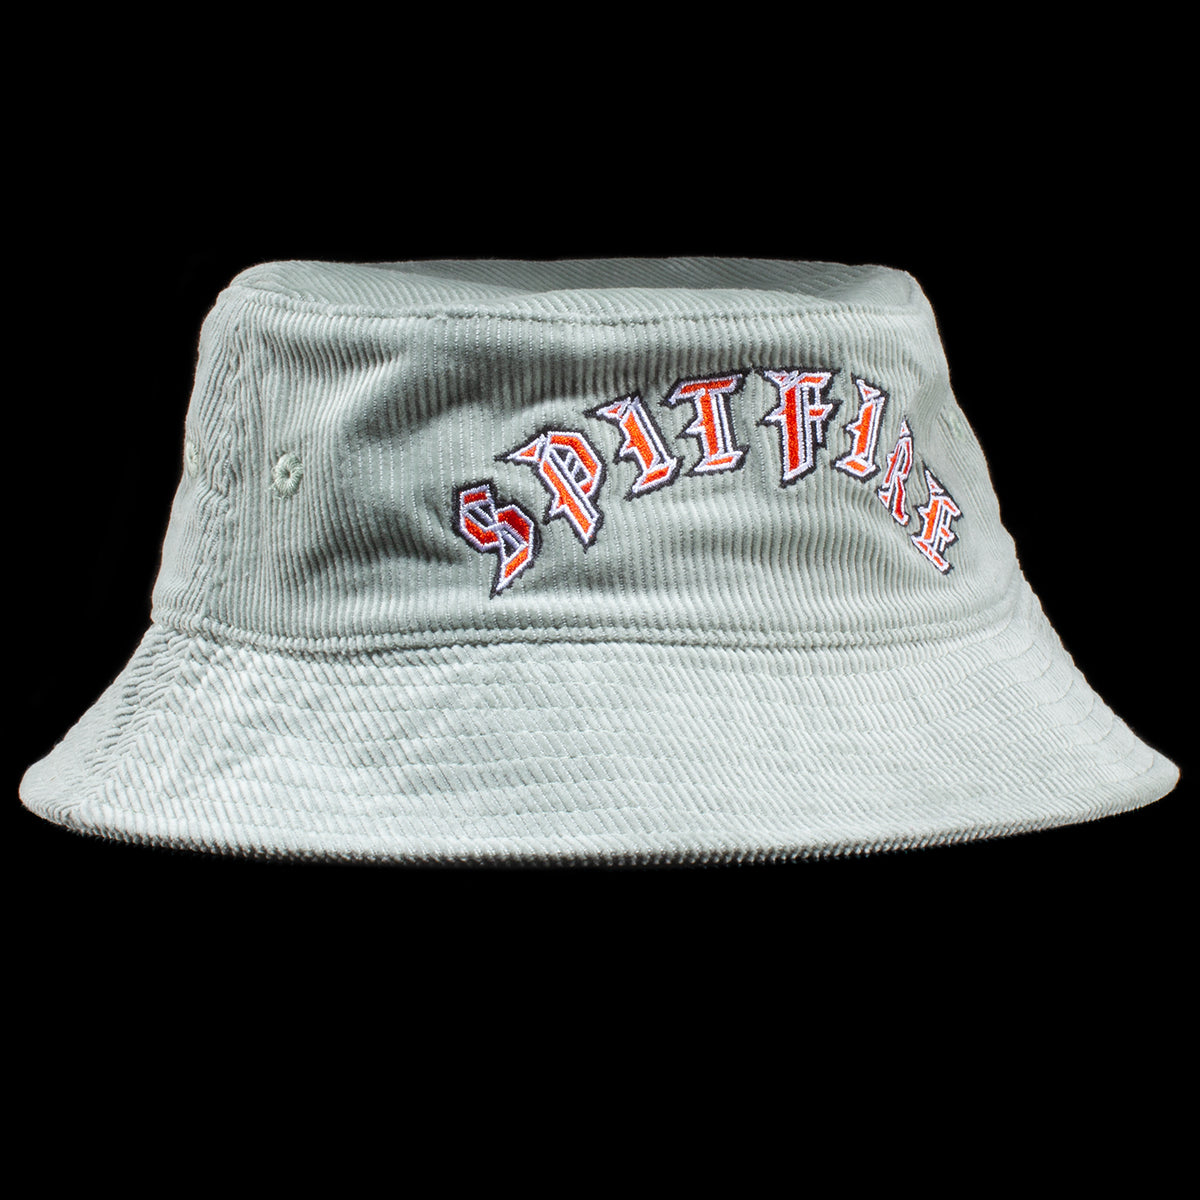 Spitfire | Old E Arch Corduroy Bucket Hat Style # 50310020C00 Color : Grey